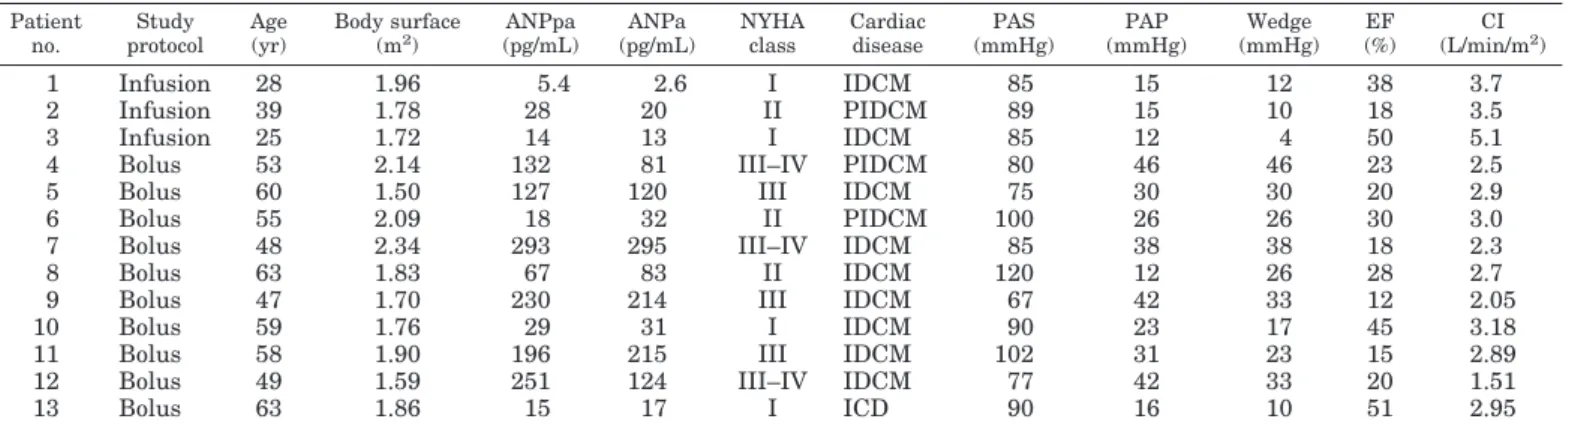 TABLE 1. Main clinical data of patients studied